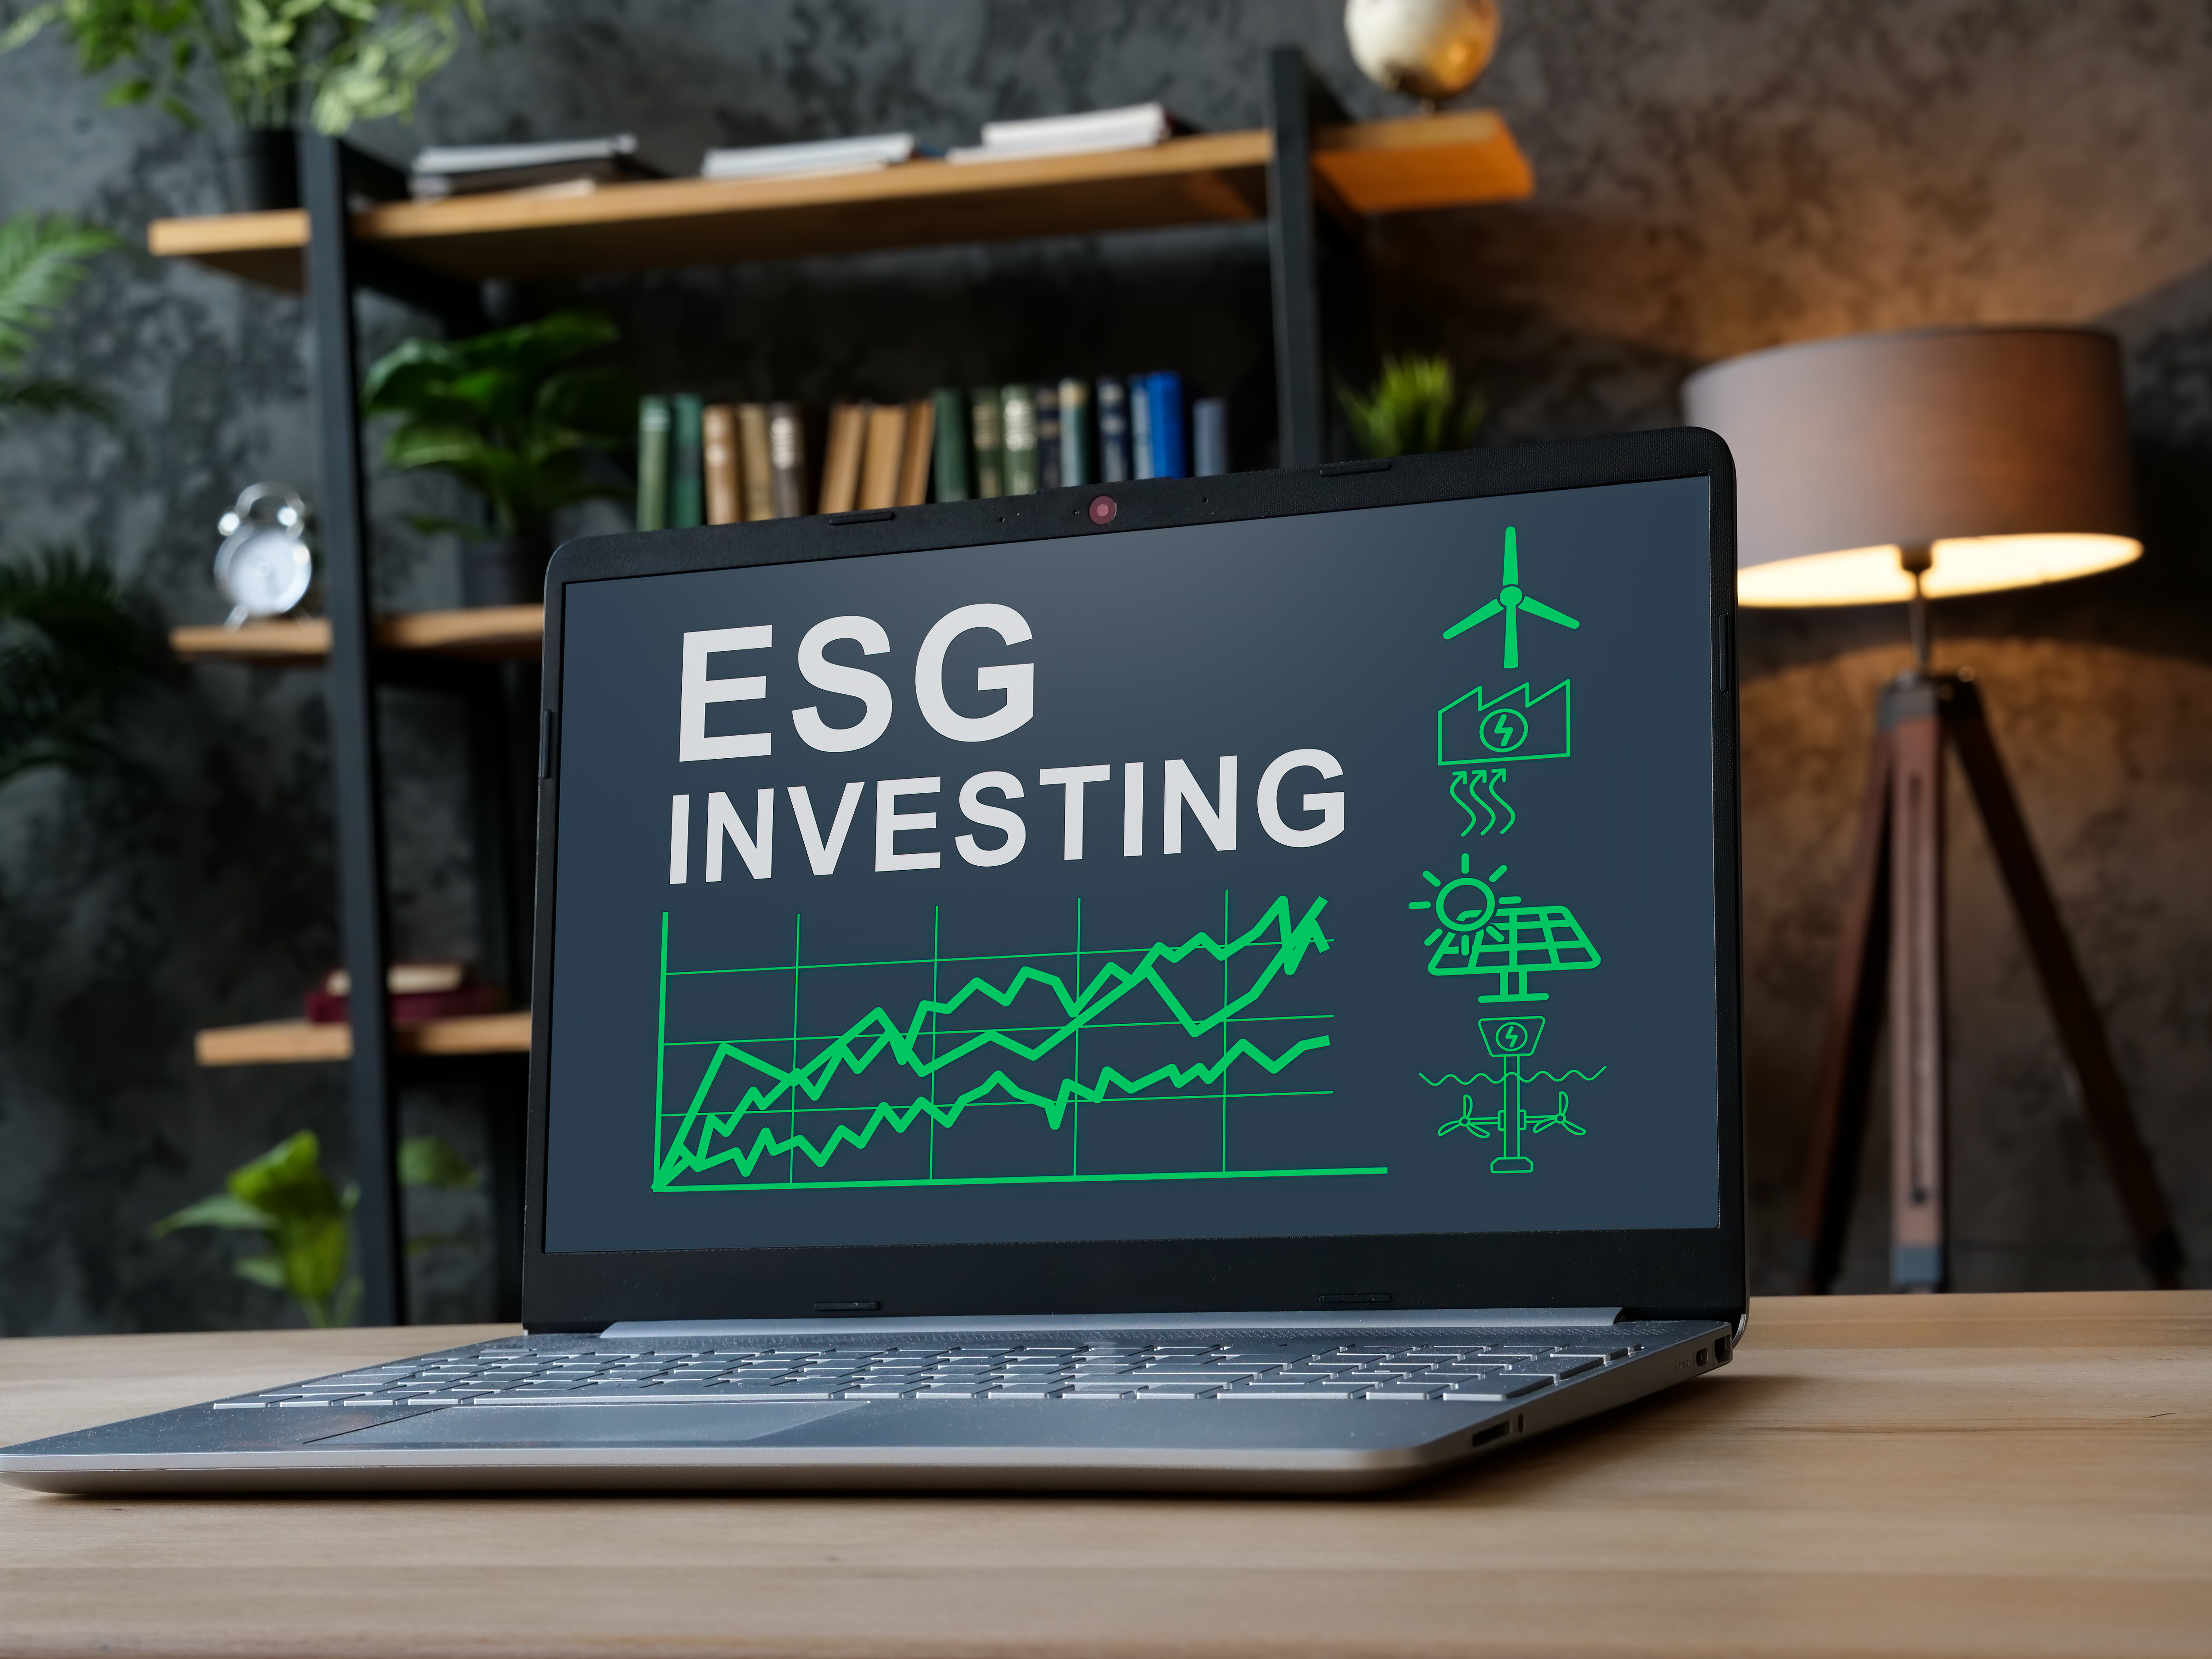 ESG investing results on the l